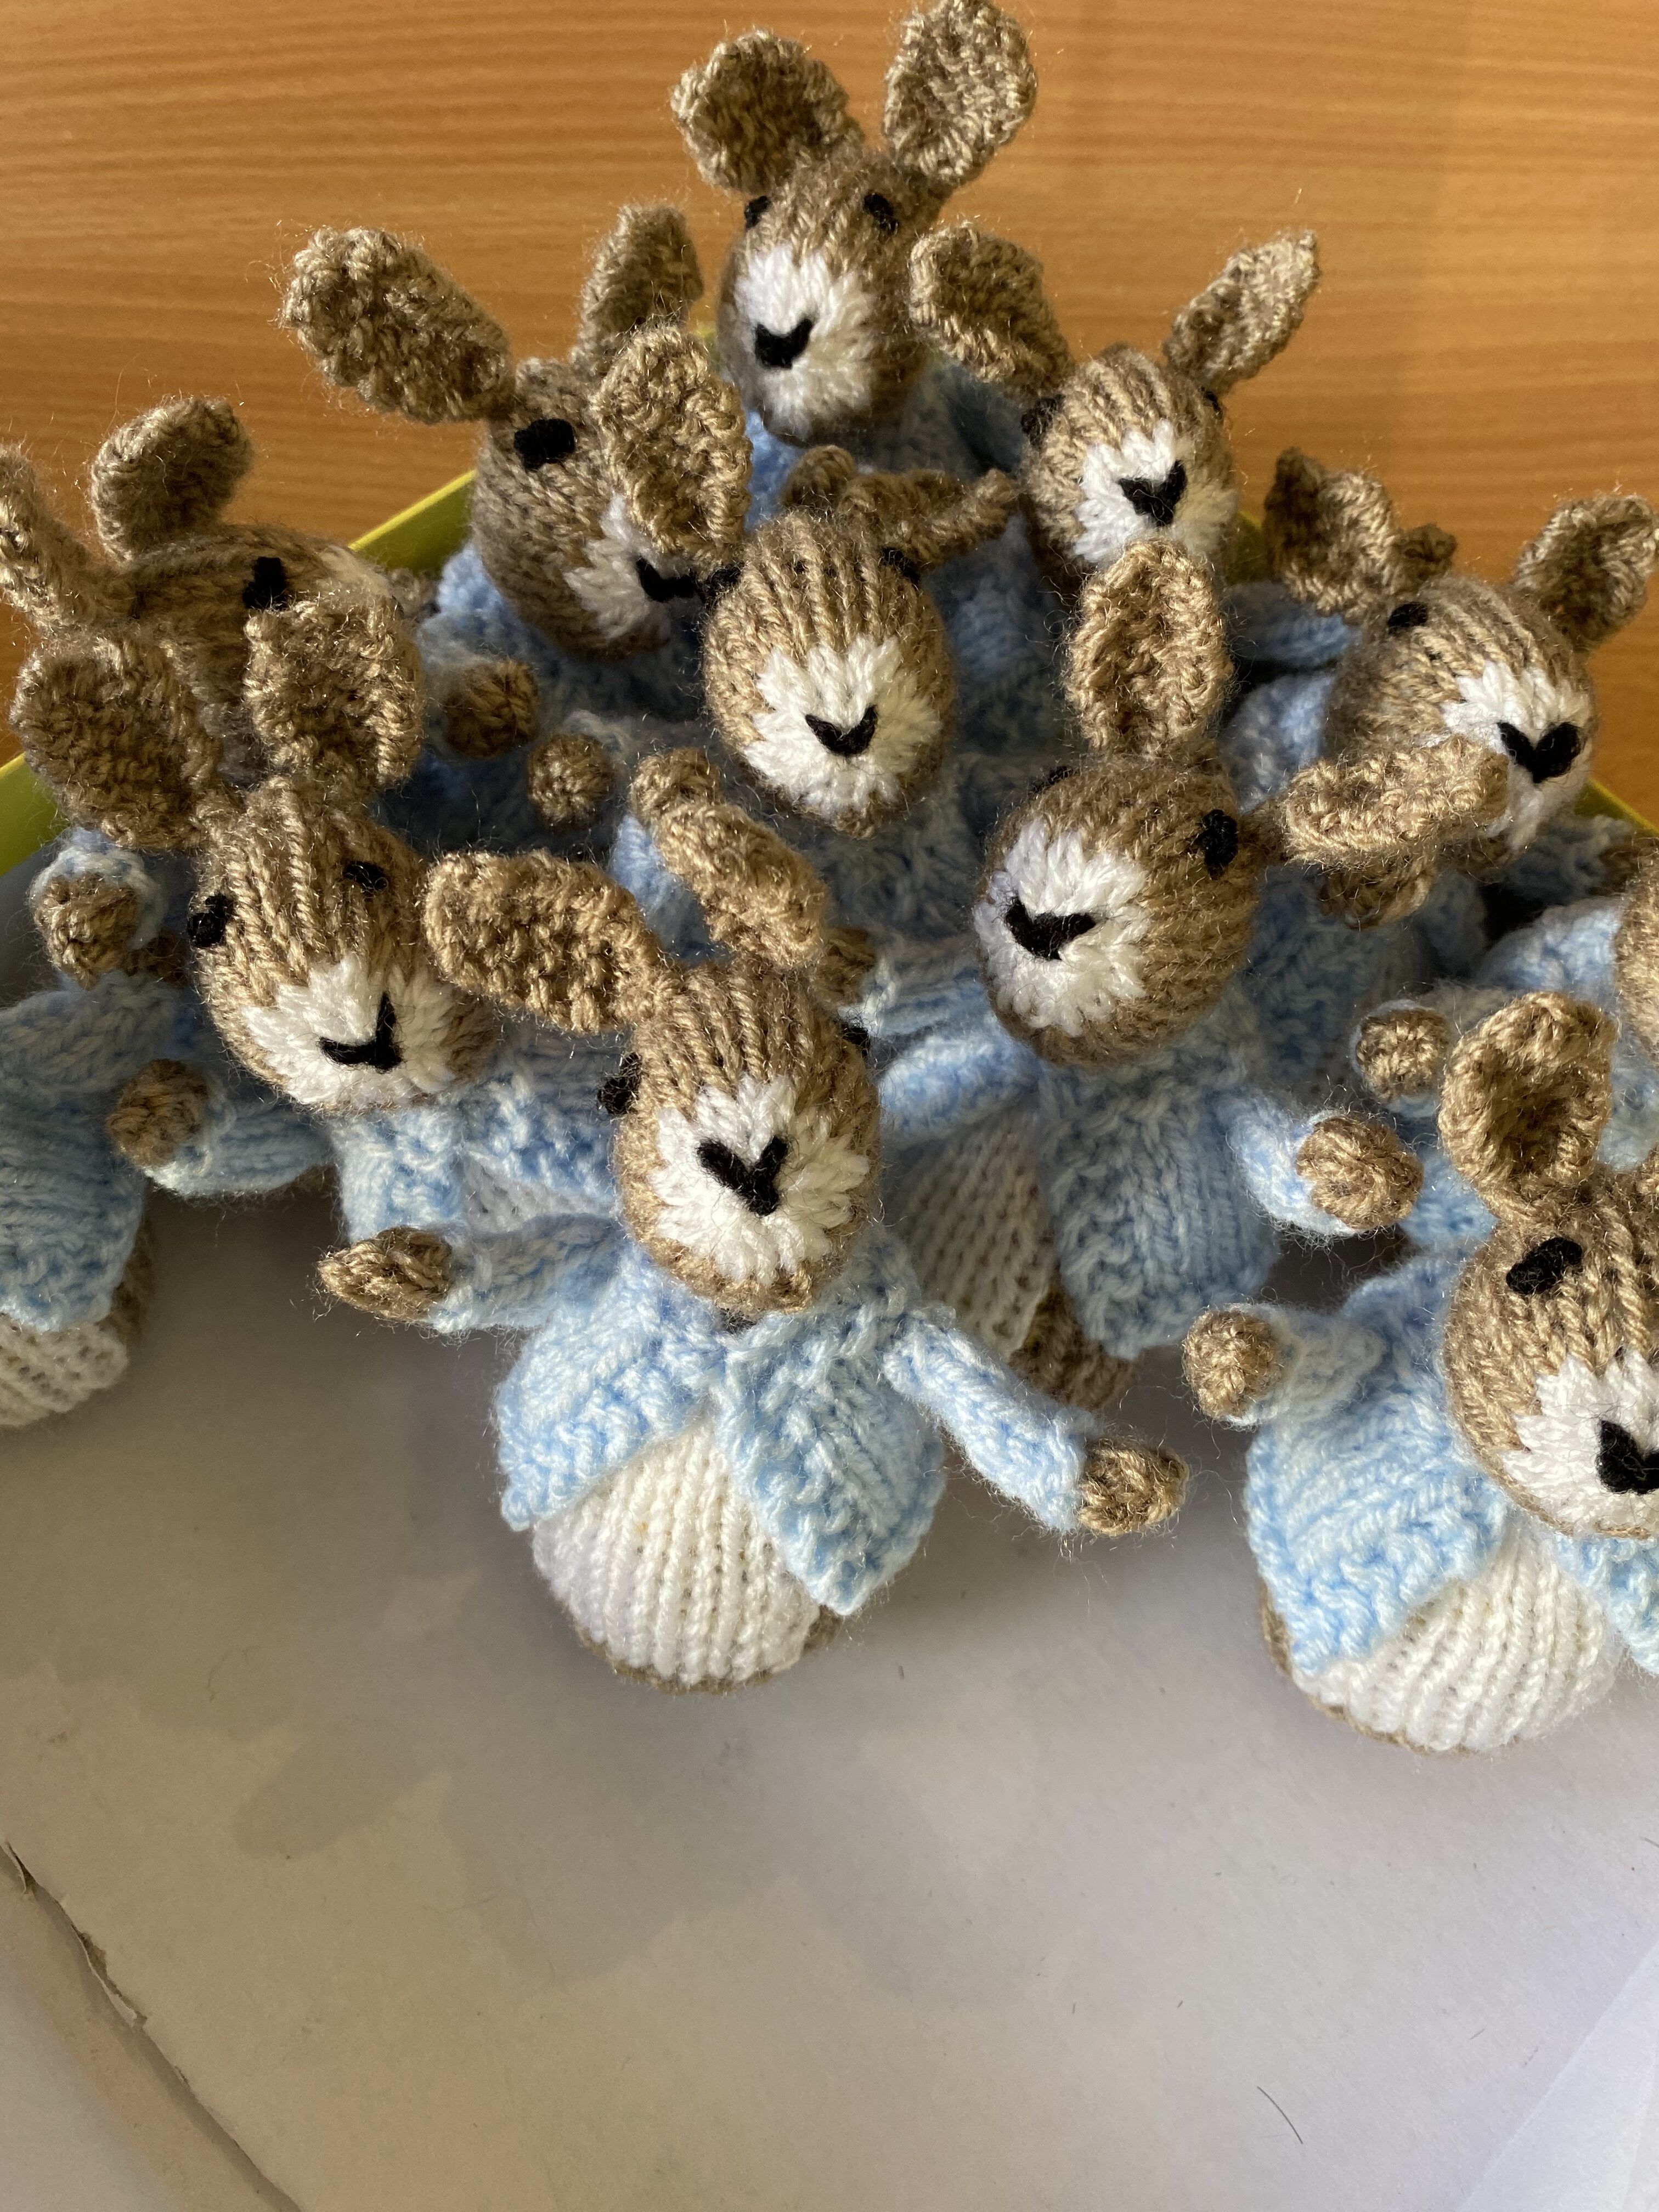 Knitted collection of bunnies